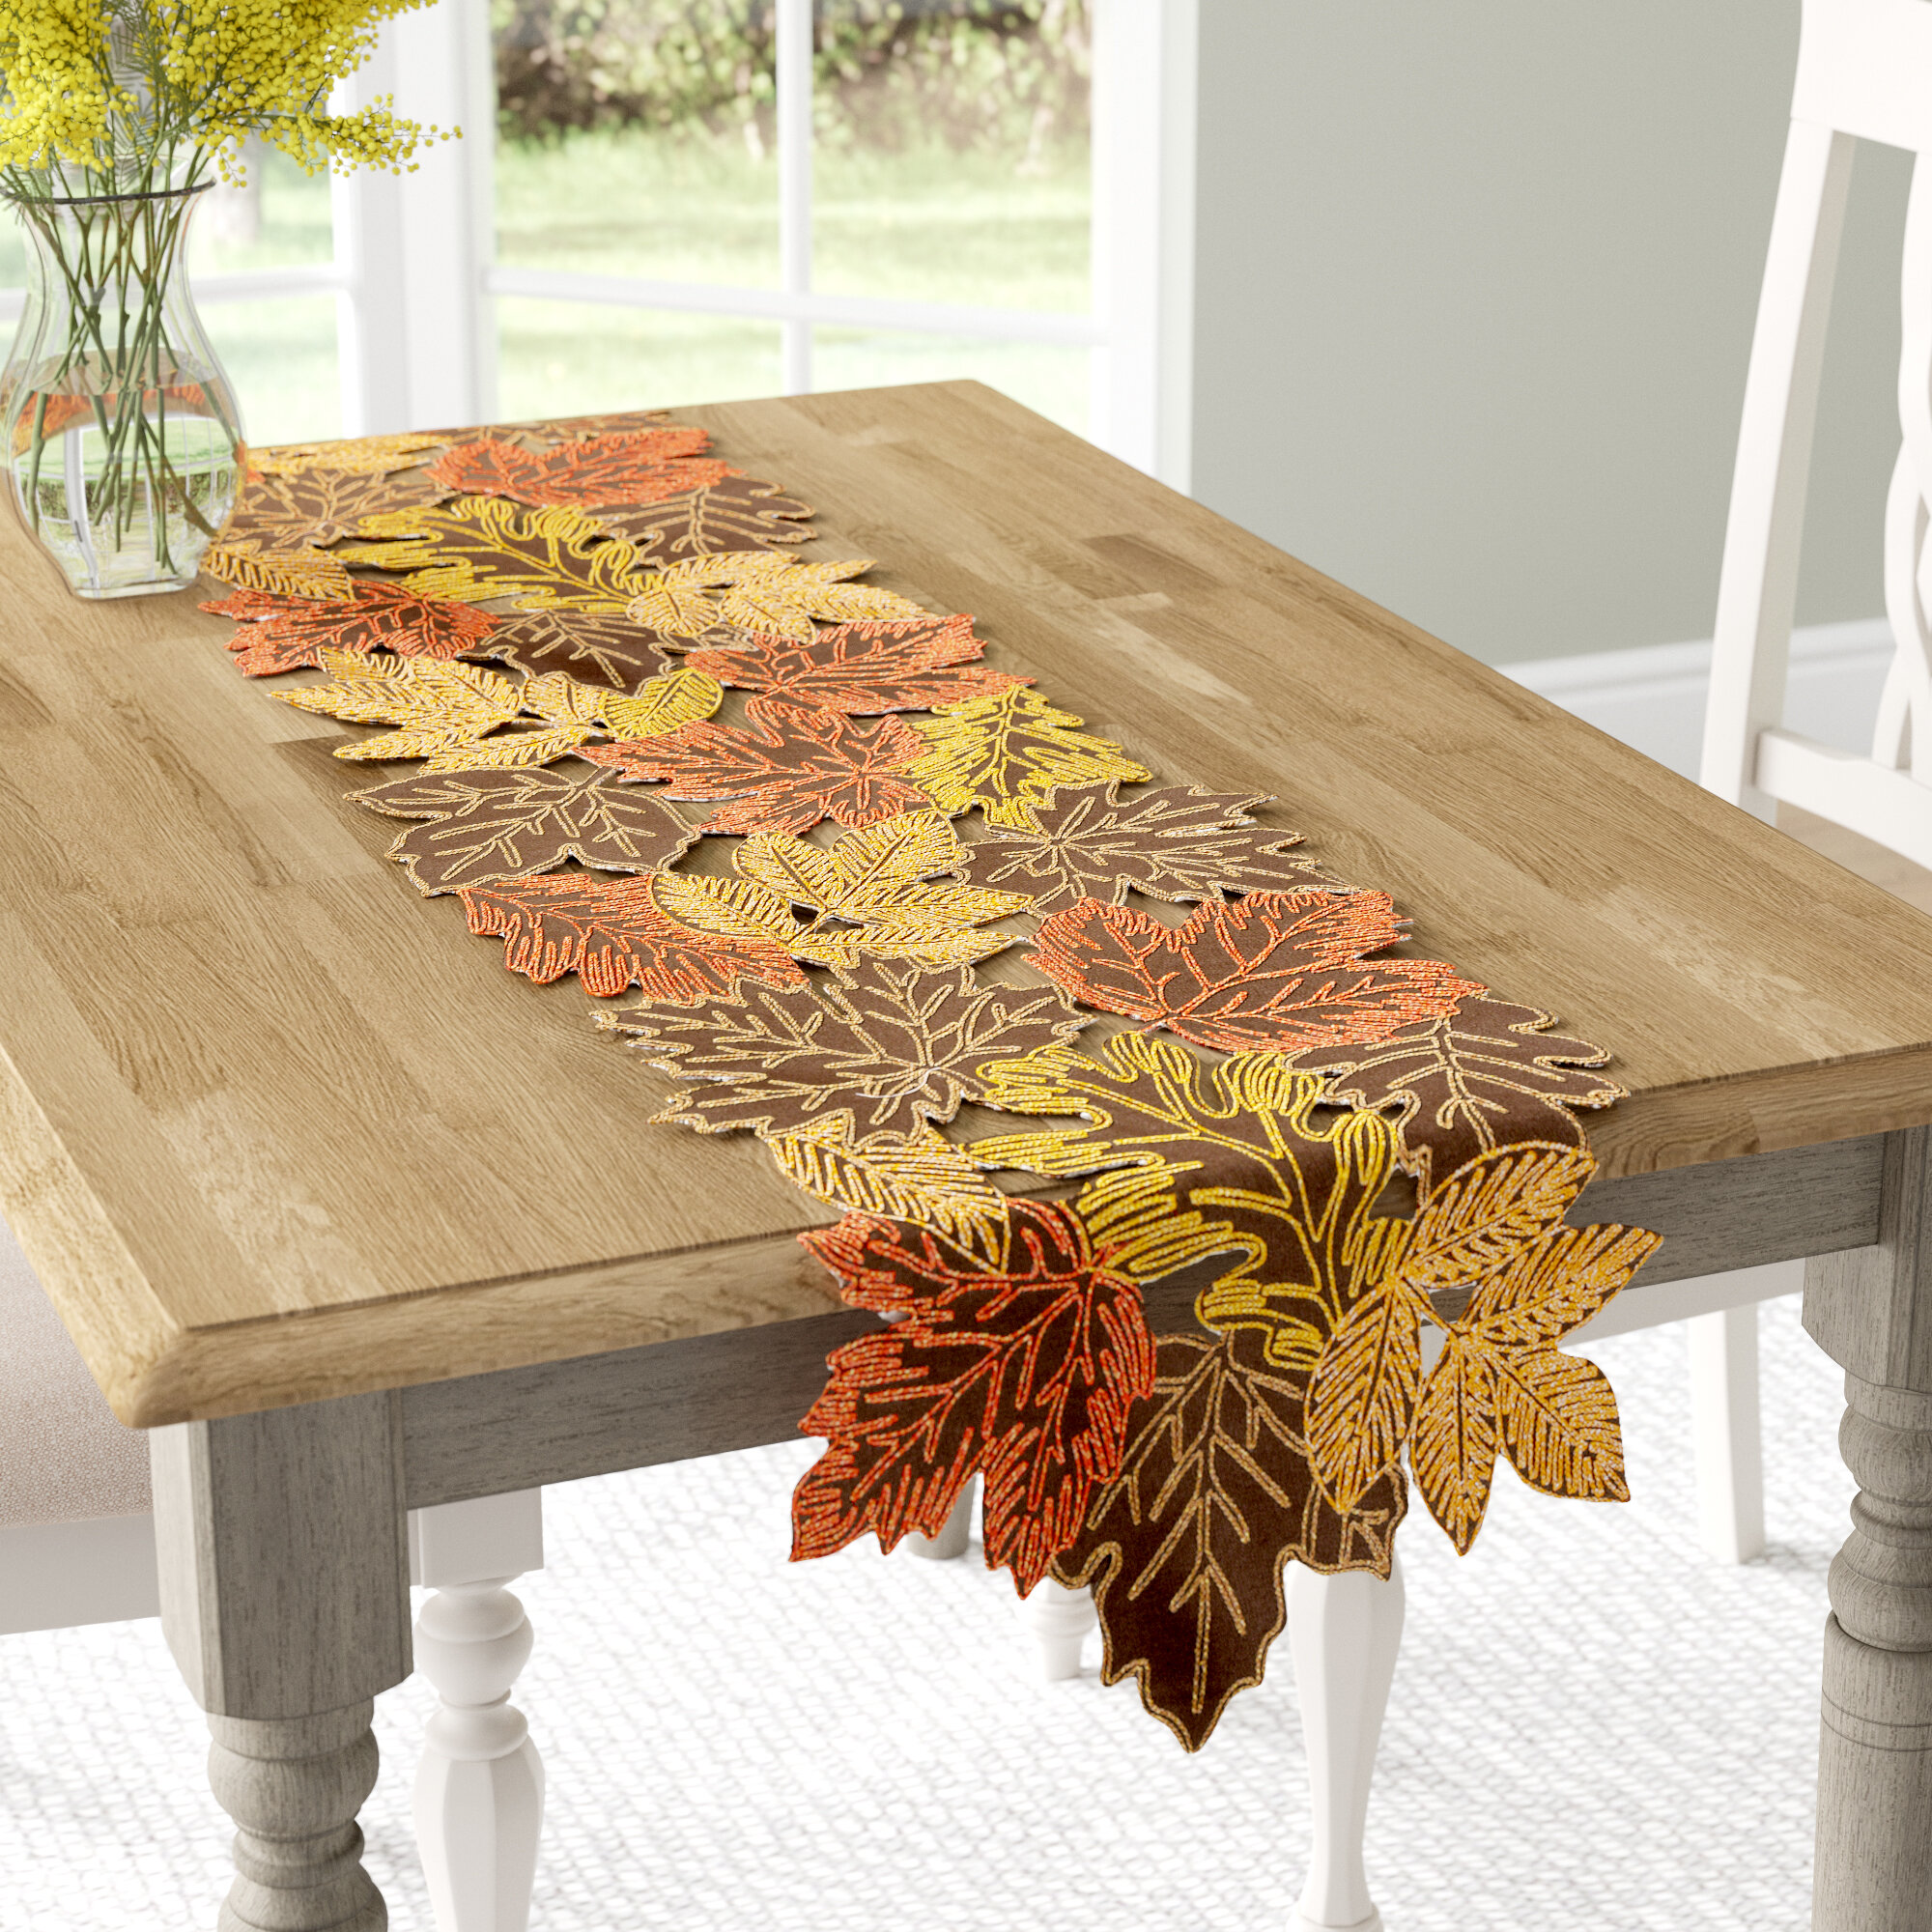 WBSNDB Autumn Nature Frame Fall Season Vegetables Table Runner Kitchen Dining Table Runner 16 X 72 Inch for Dinner Parties Decor Events 